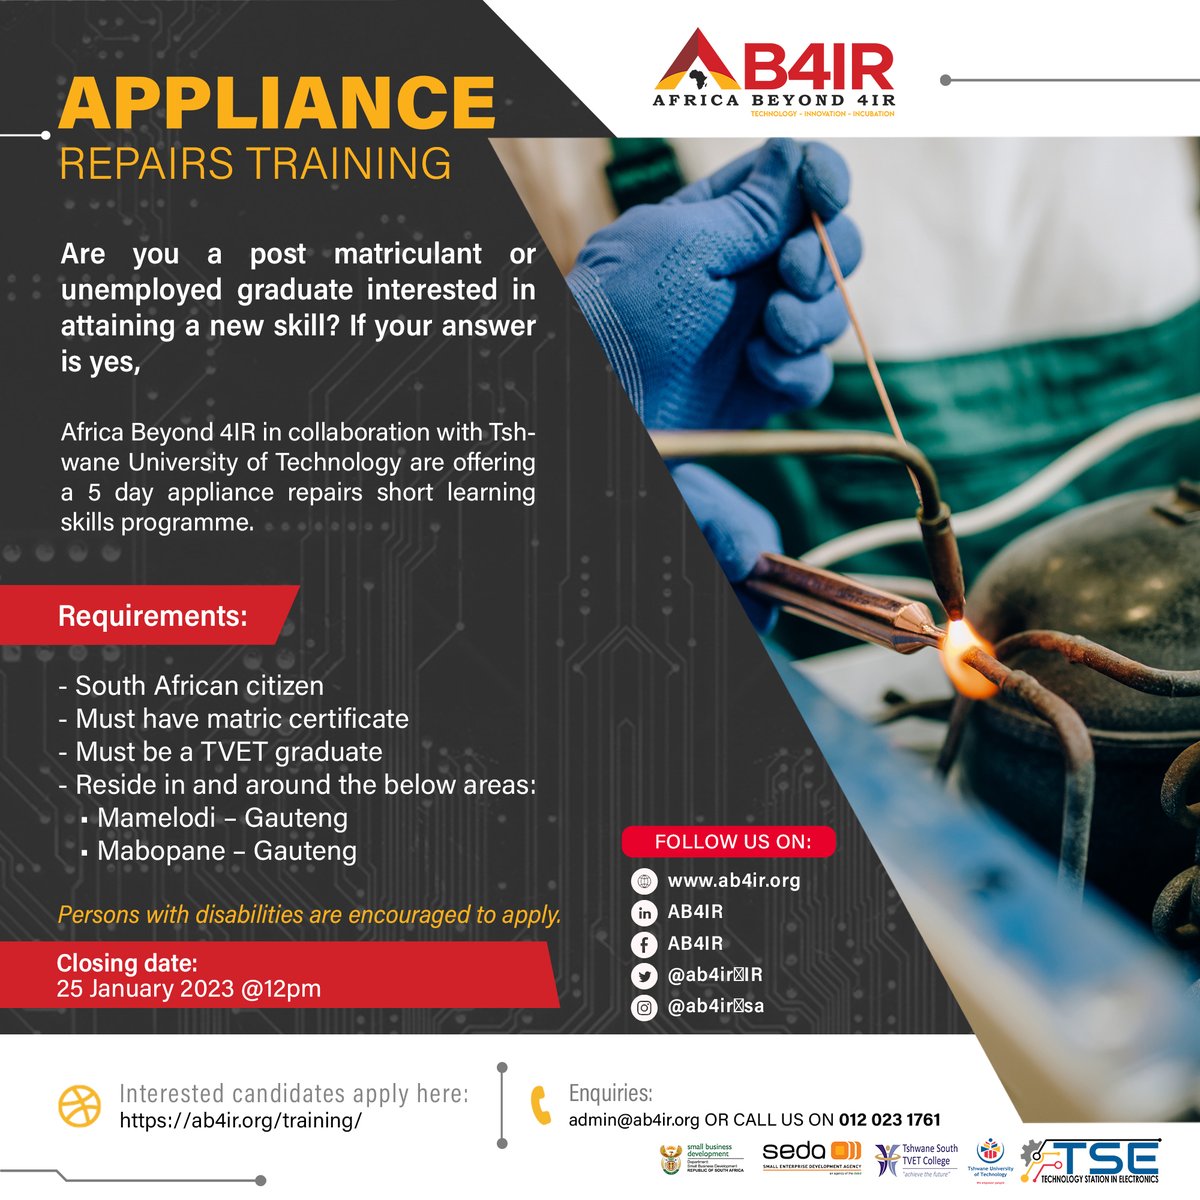 @ab4_ir  in partnership with the @Official_TUT is inviting unemployed youth for Cell phone repairs and Appliance repairs training. 
Interested candidates kindly apply on: ab4ir.org/training/
For more information call 0120231761
#ab4ir #cellphonerepairs #appliancerepairs